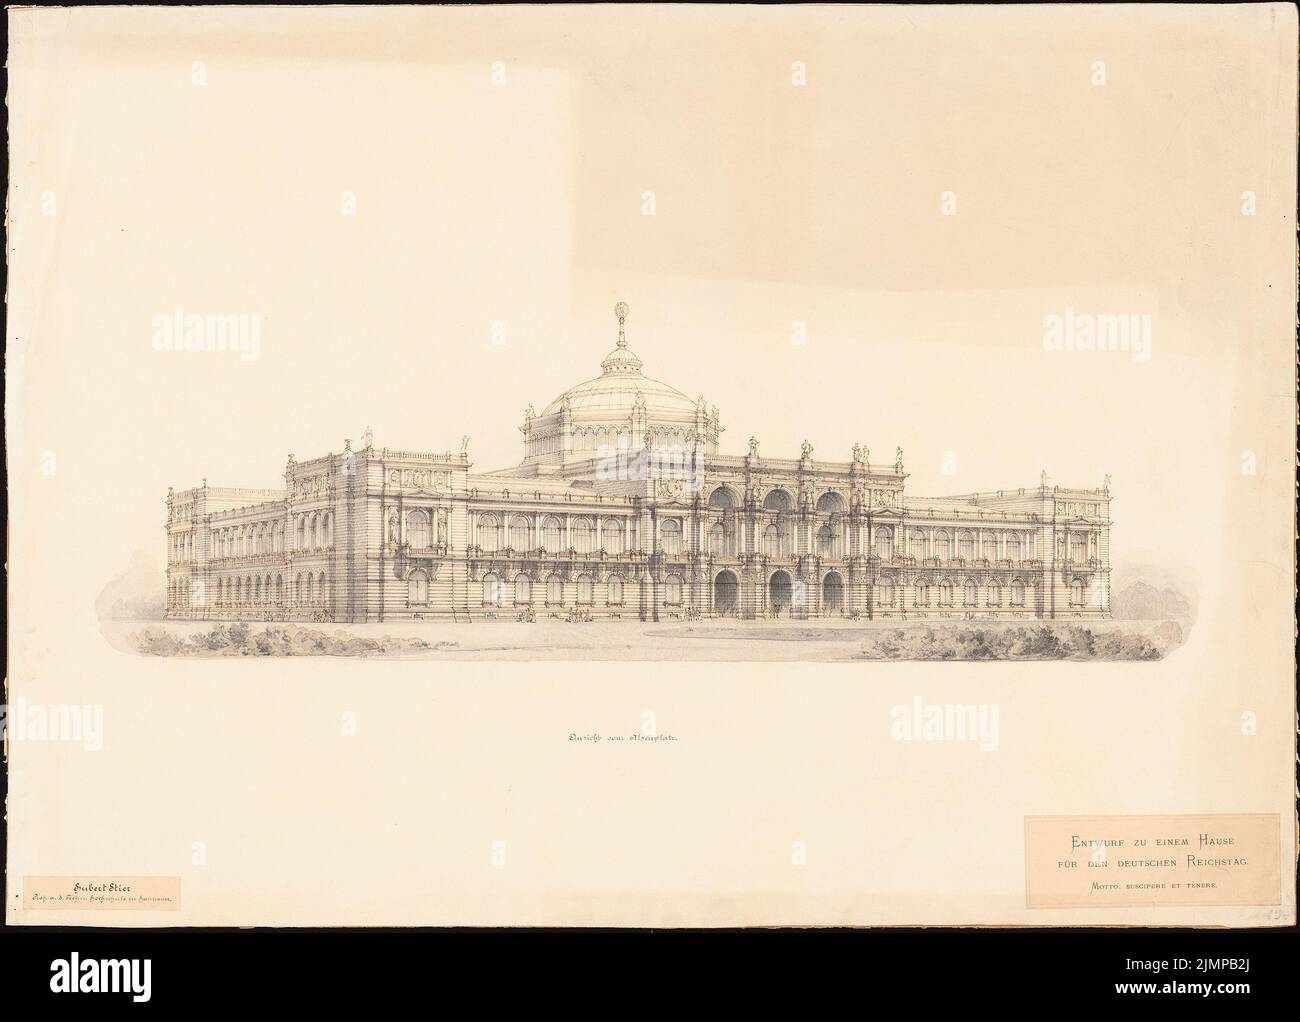 Bull Hubert (1838-1907), Reichstag, Berlin. Second competition (1882): Perspective view from the Alsenplatz. Tusche, pencil watercolor on the box, 61.8 x 86.2 cm (including scan edges) Stier d. Ä. Hubert  (1838-1907): Reichstag, Berlin. Zweiter Wettbewerb Stock Photo